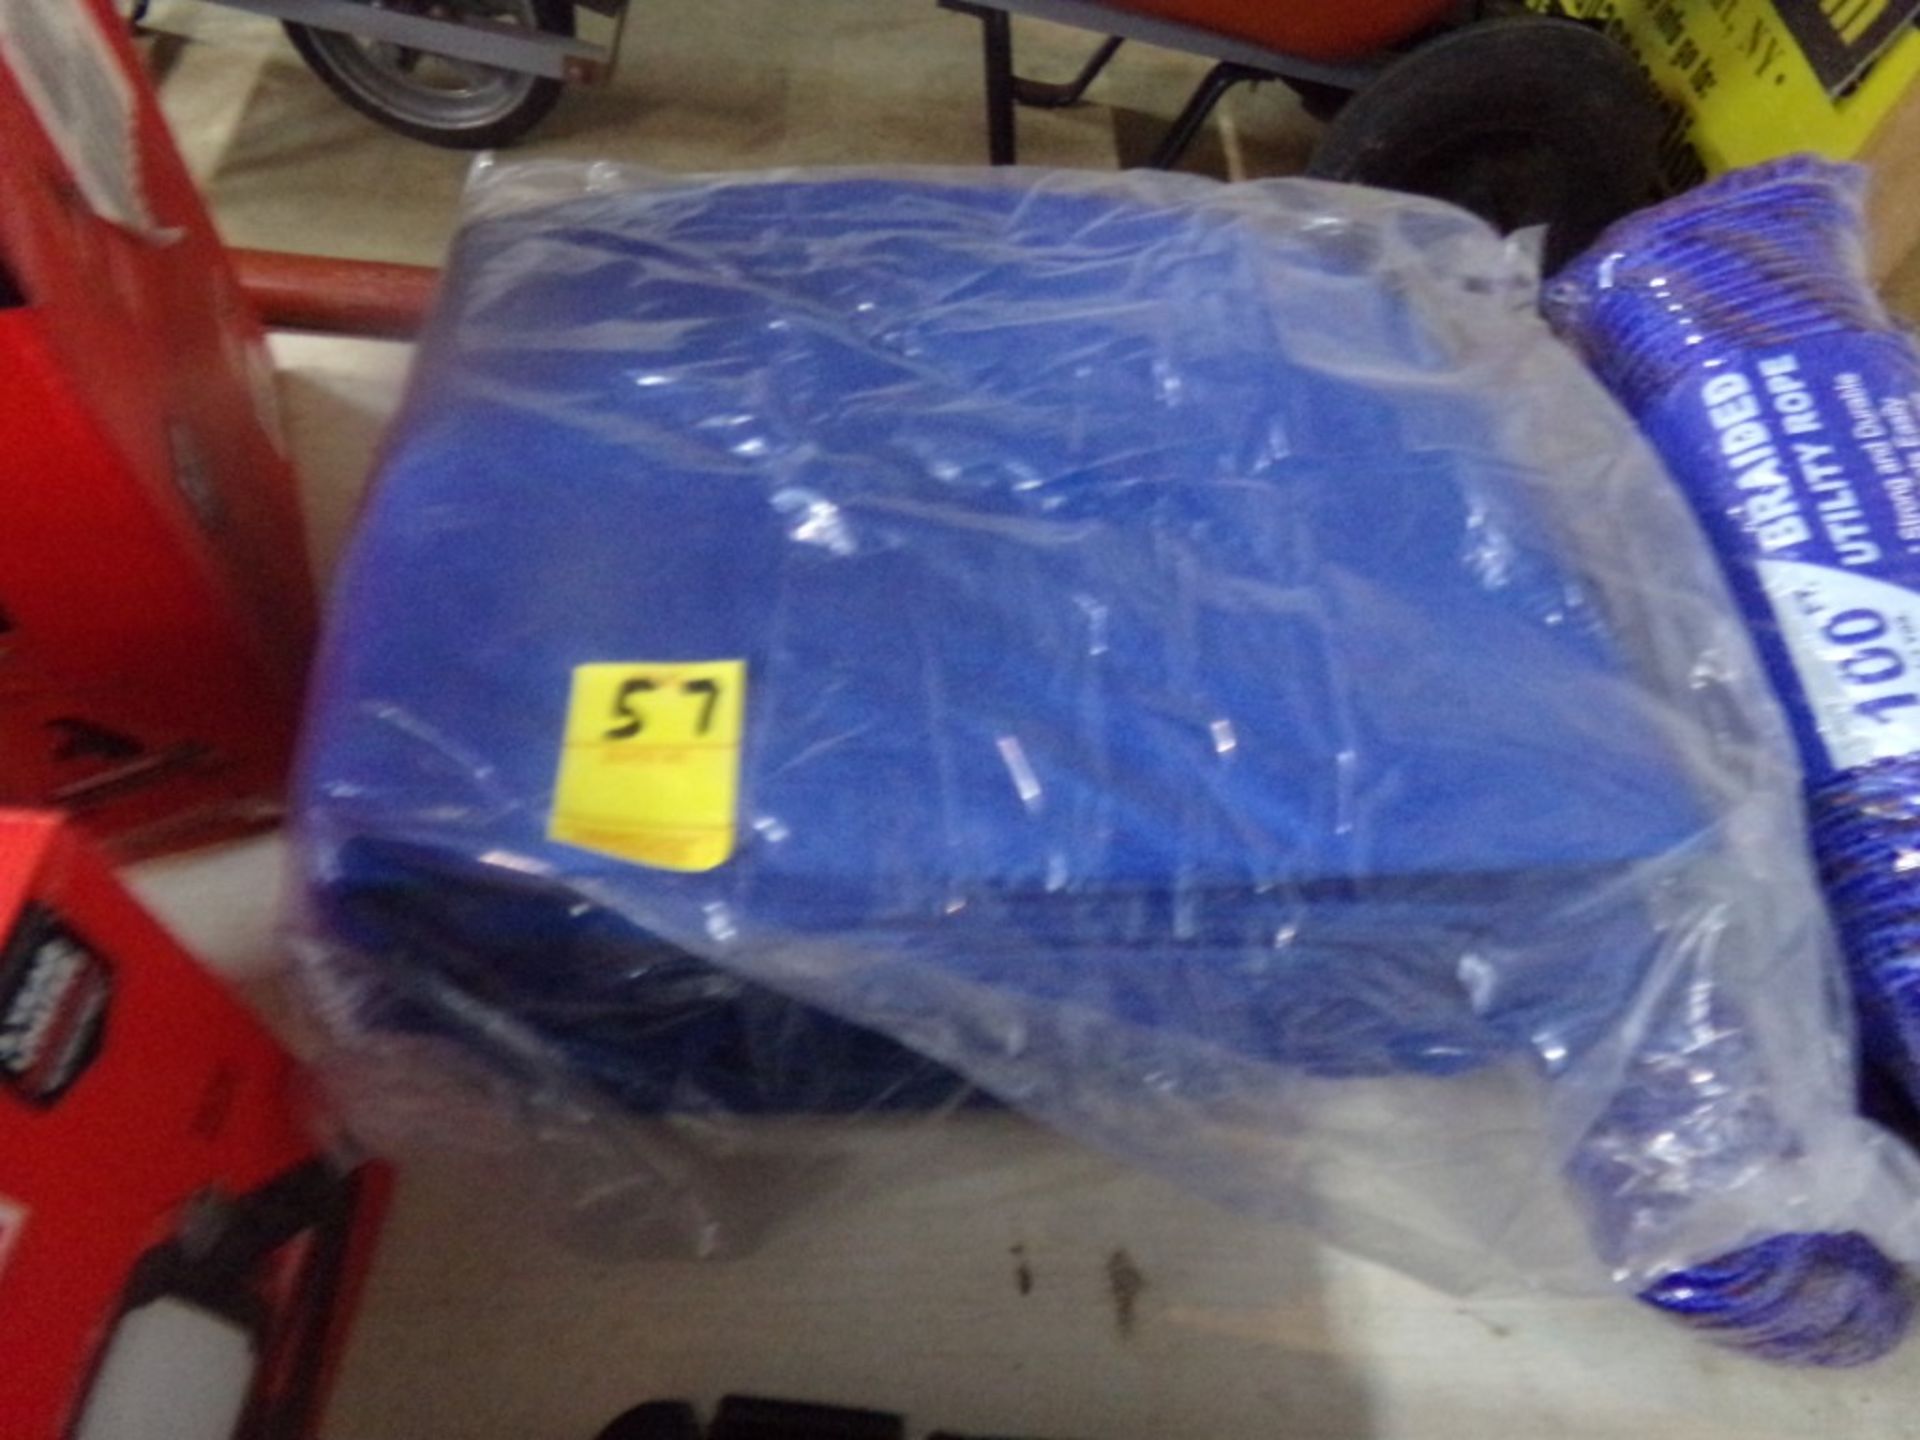 New, Blue, Tarp, No Markings, Very Large, No Dimensions